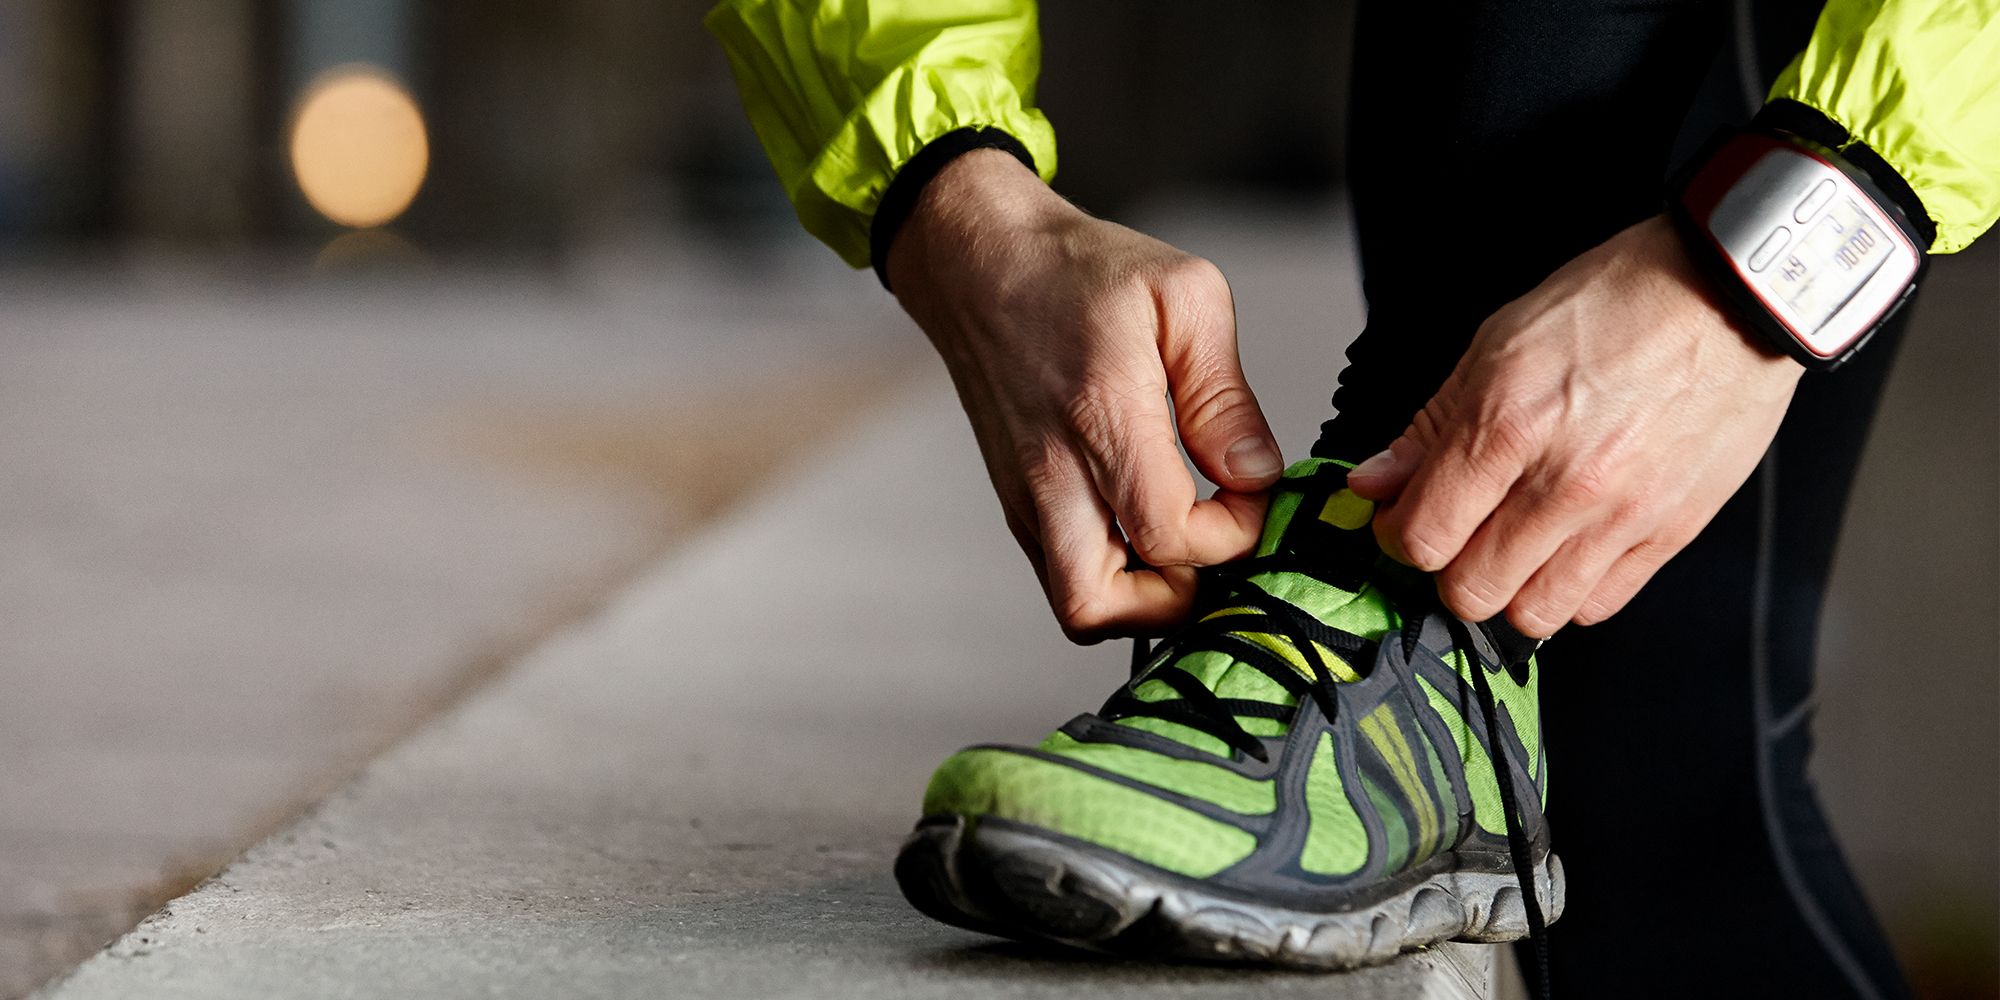 How to Tie Shoes | Tying and Lacing Your Running Shoes